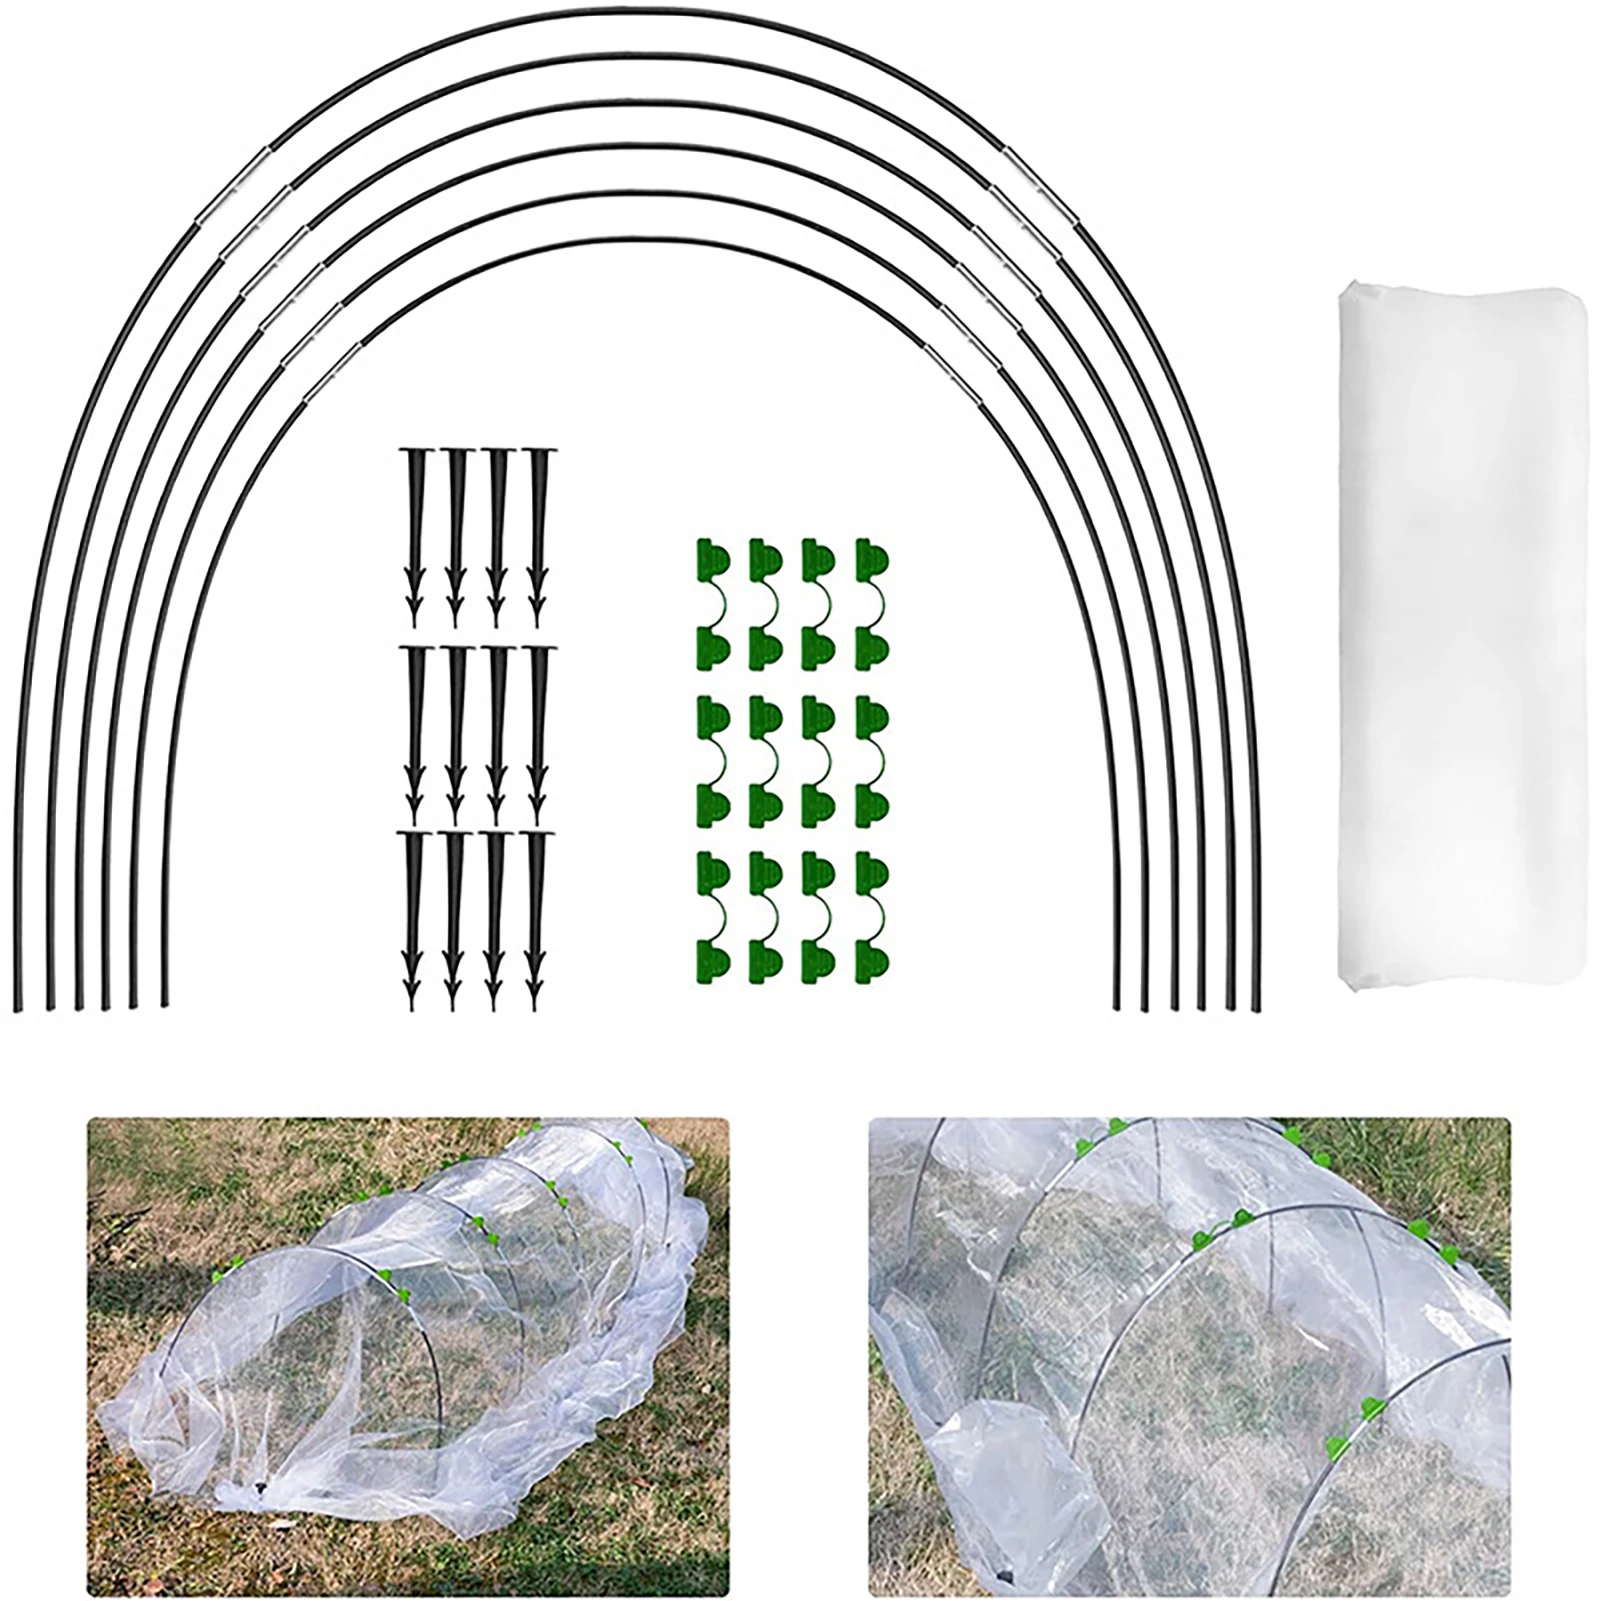 Greenhouse Seedling Garden Arch Shed Insect Mesh Set Flexible Stretchable Easy to Install Net for Outdoor Garden Landscape